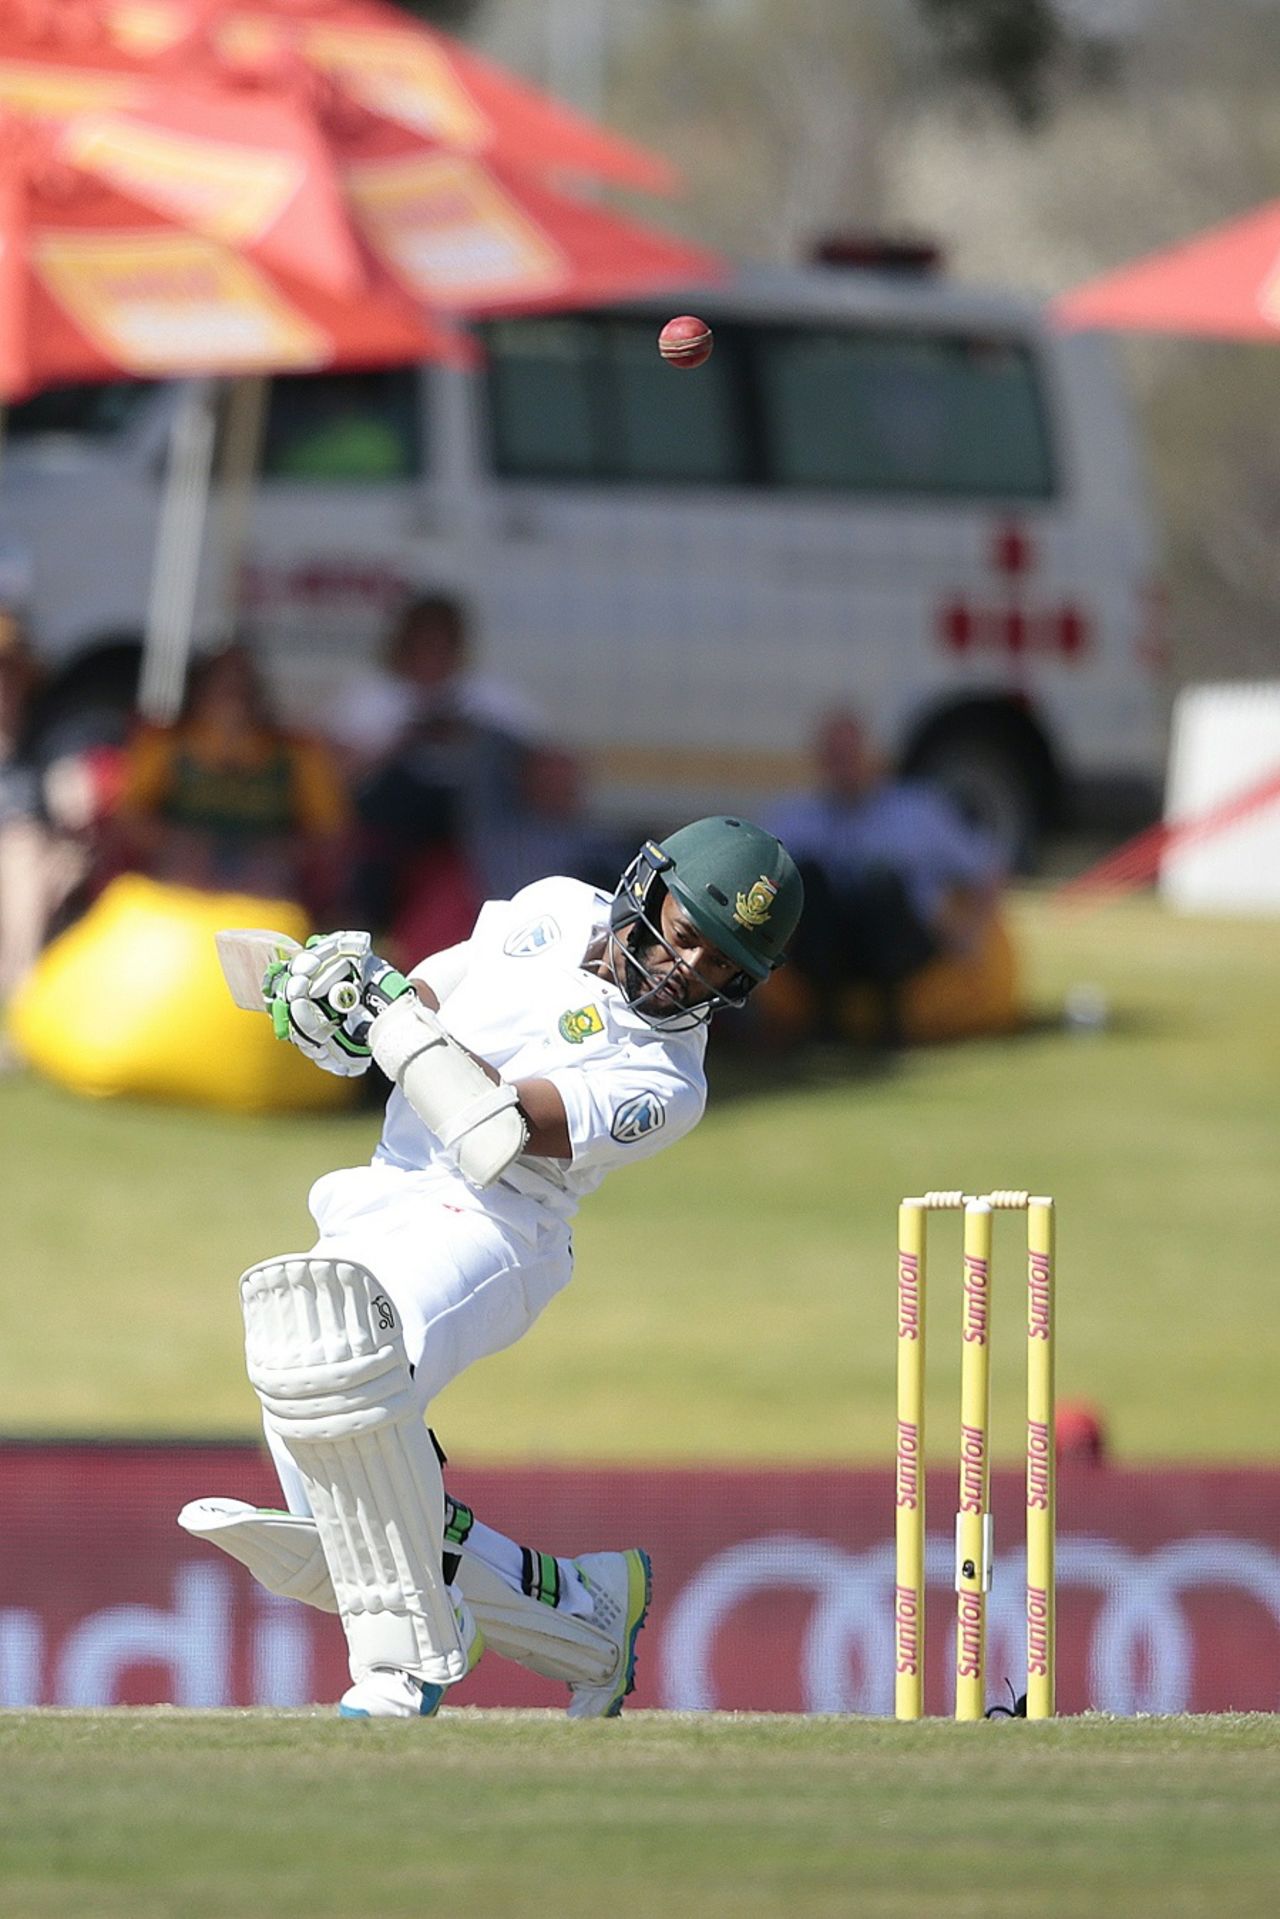 Temba Bavuma gets out of the way of a bouncer, South Africa v New Zealand, 2nd Test, Centurion, 4th day, August 30, 2016